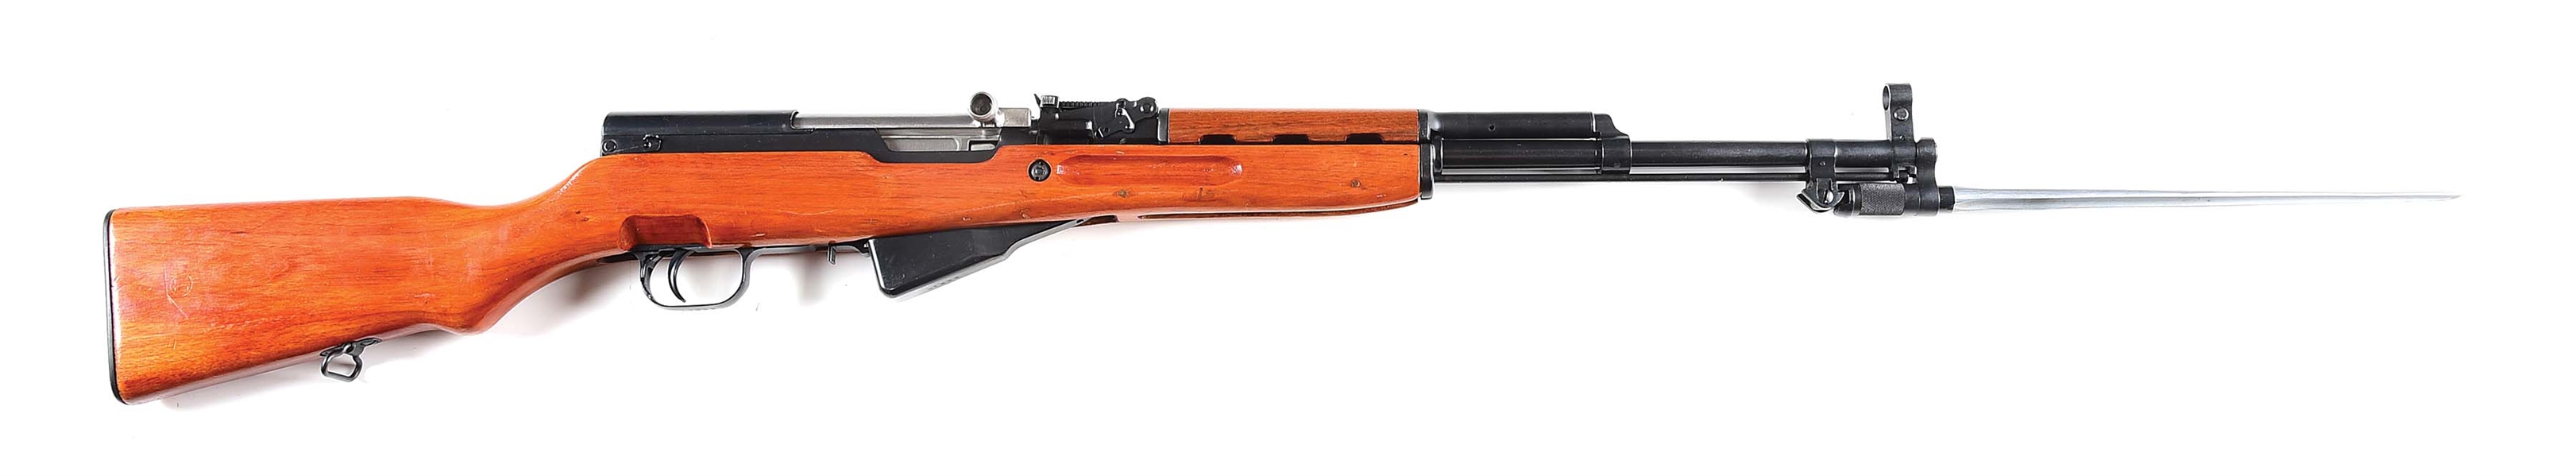 (M) EXCELLENT CHINESE SKS SEMI-AUTOMATIC RIFLE WITH FACTORY SIDEMOUNTED SCOPE & ACCESSORIES.